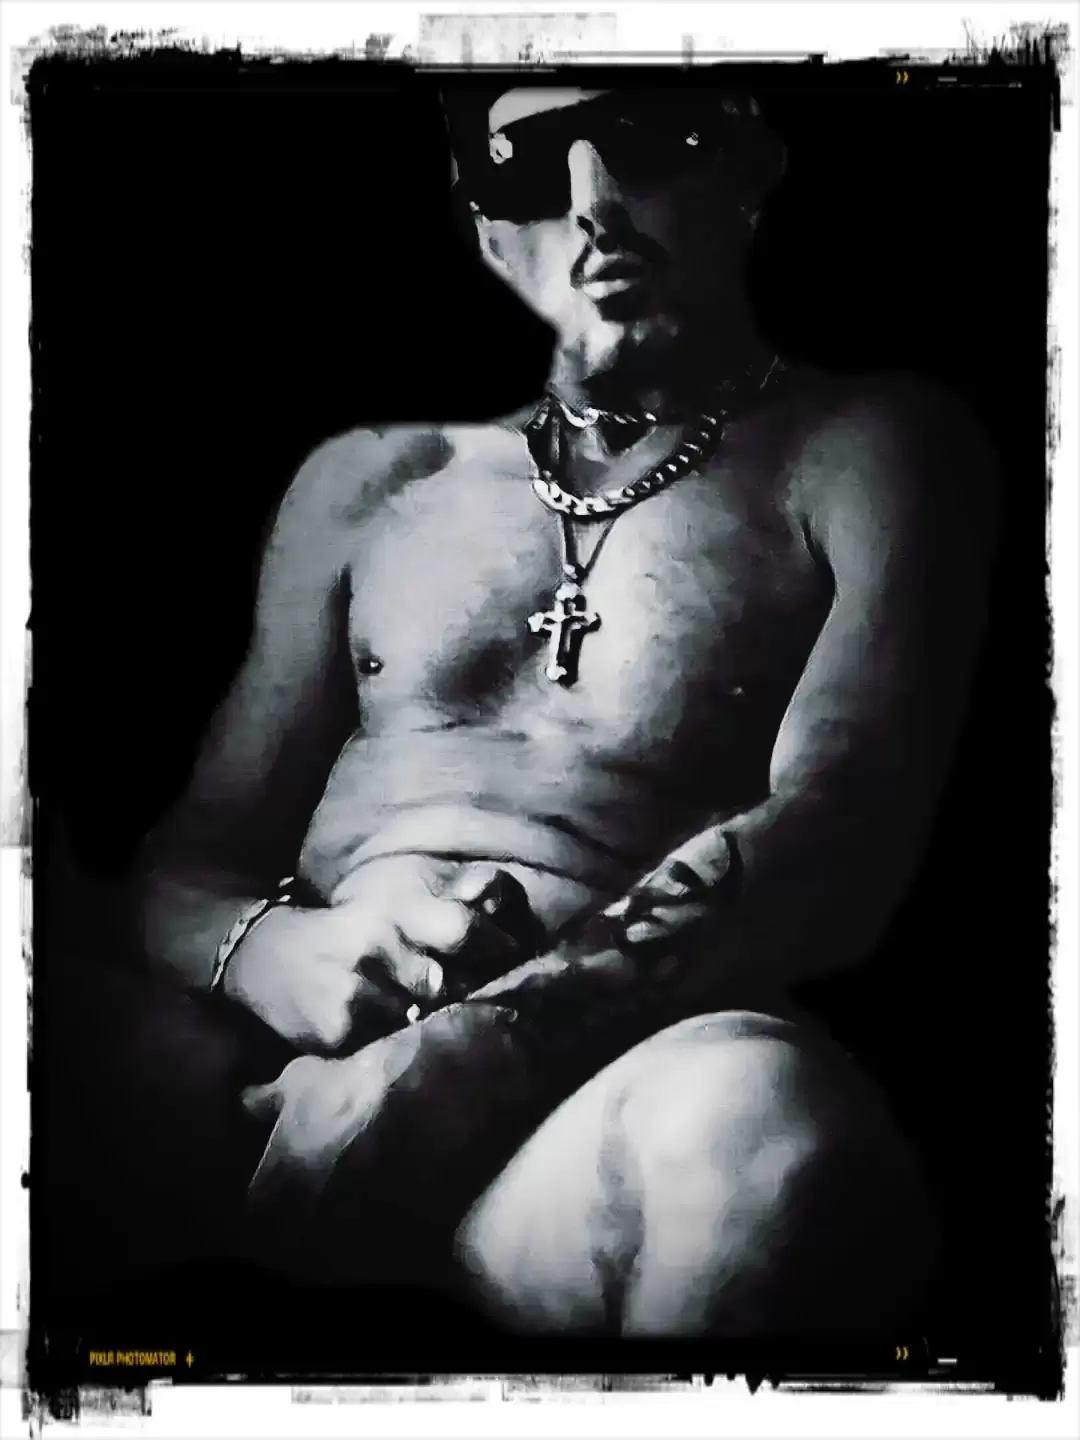 B&W photograph of a man in a seductive pose 1